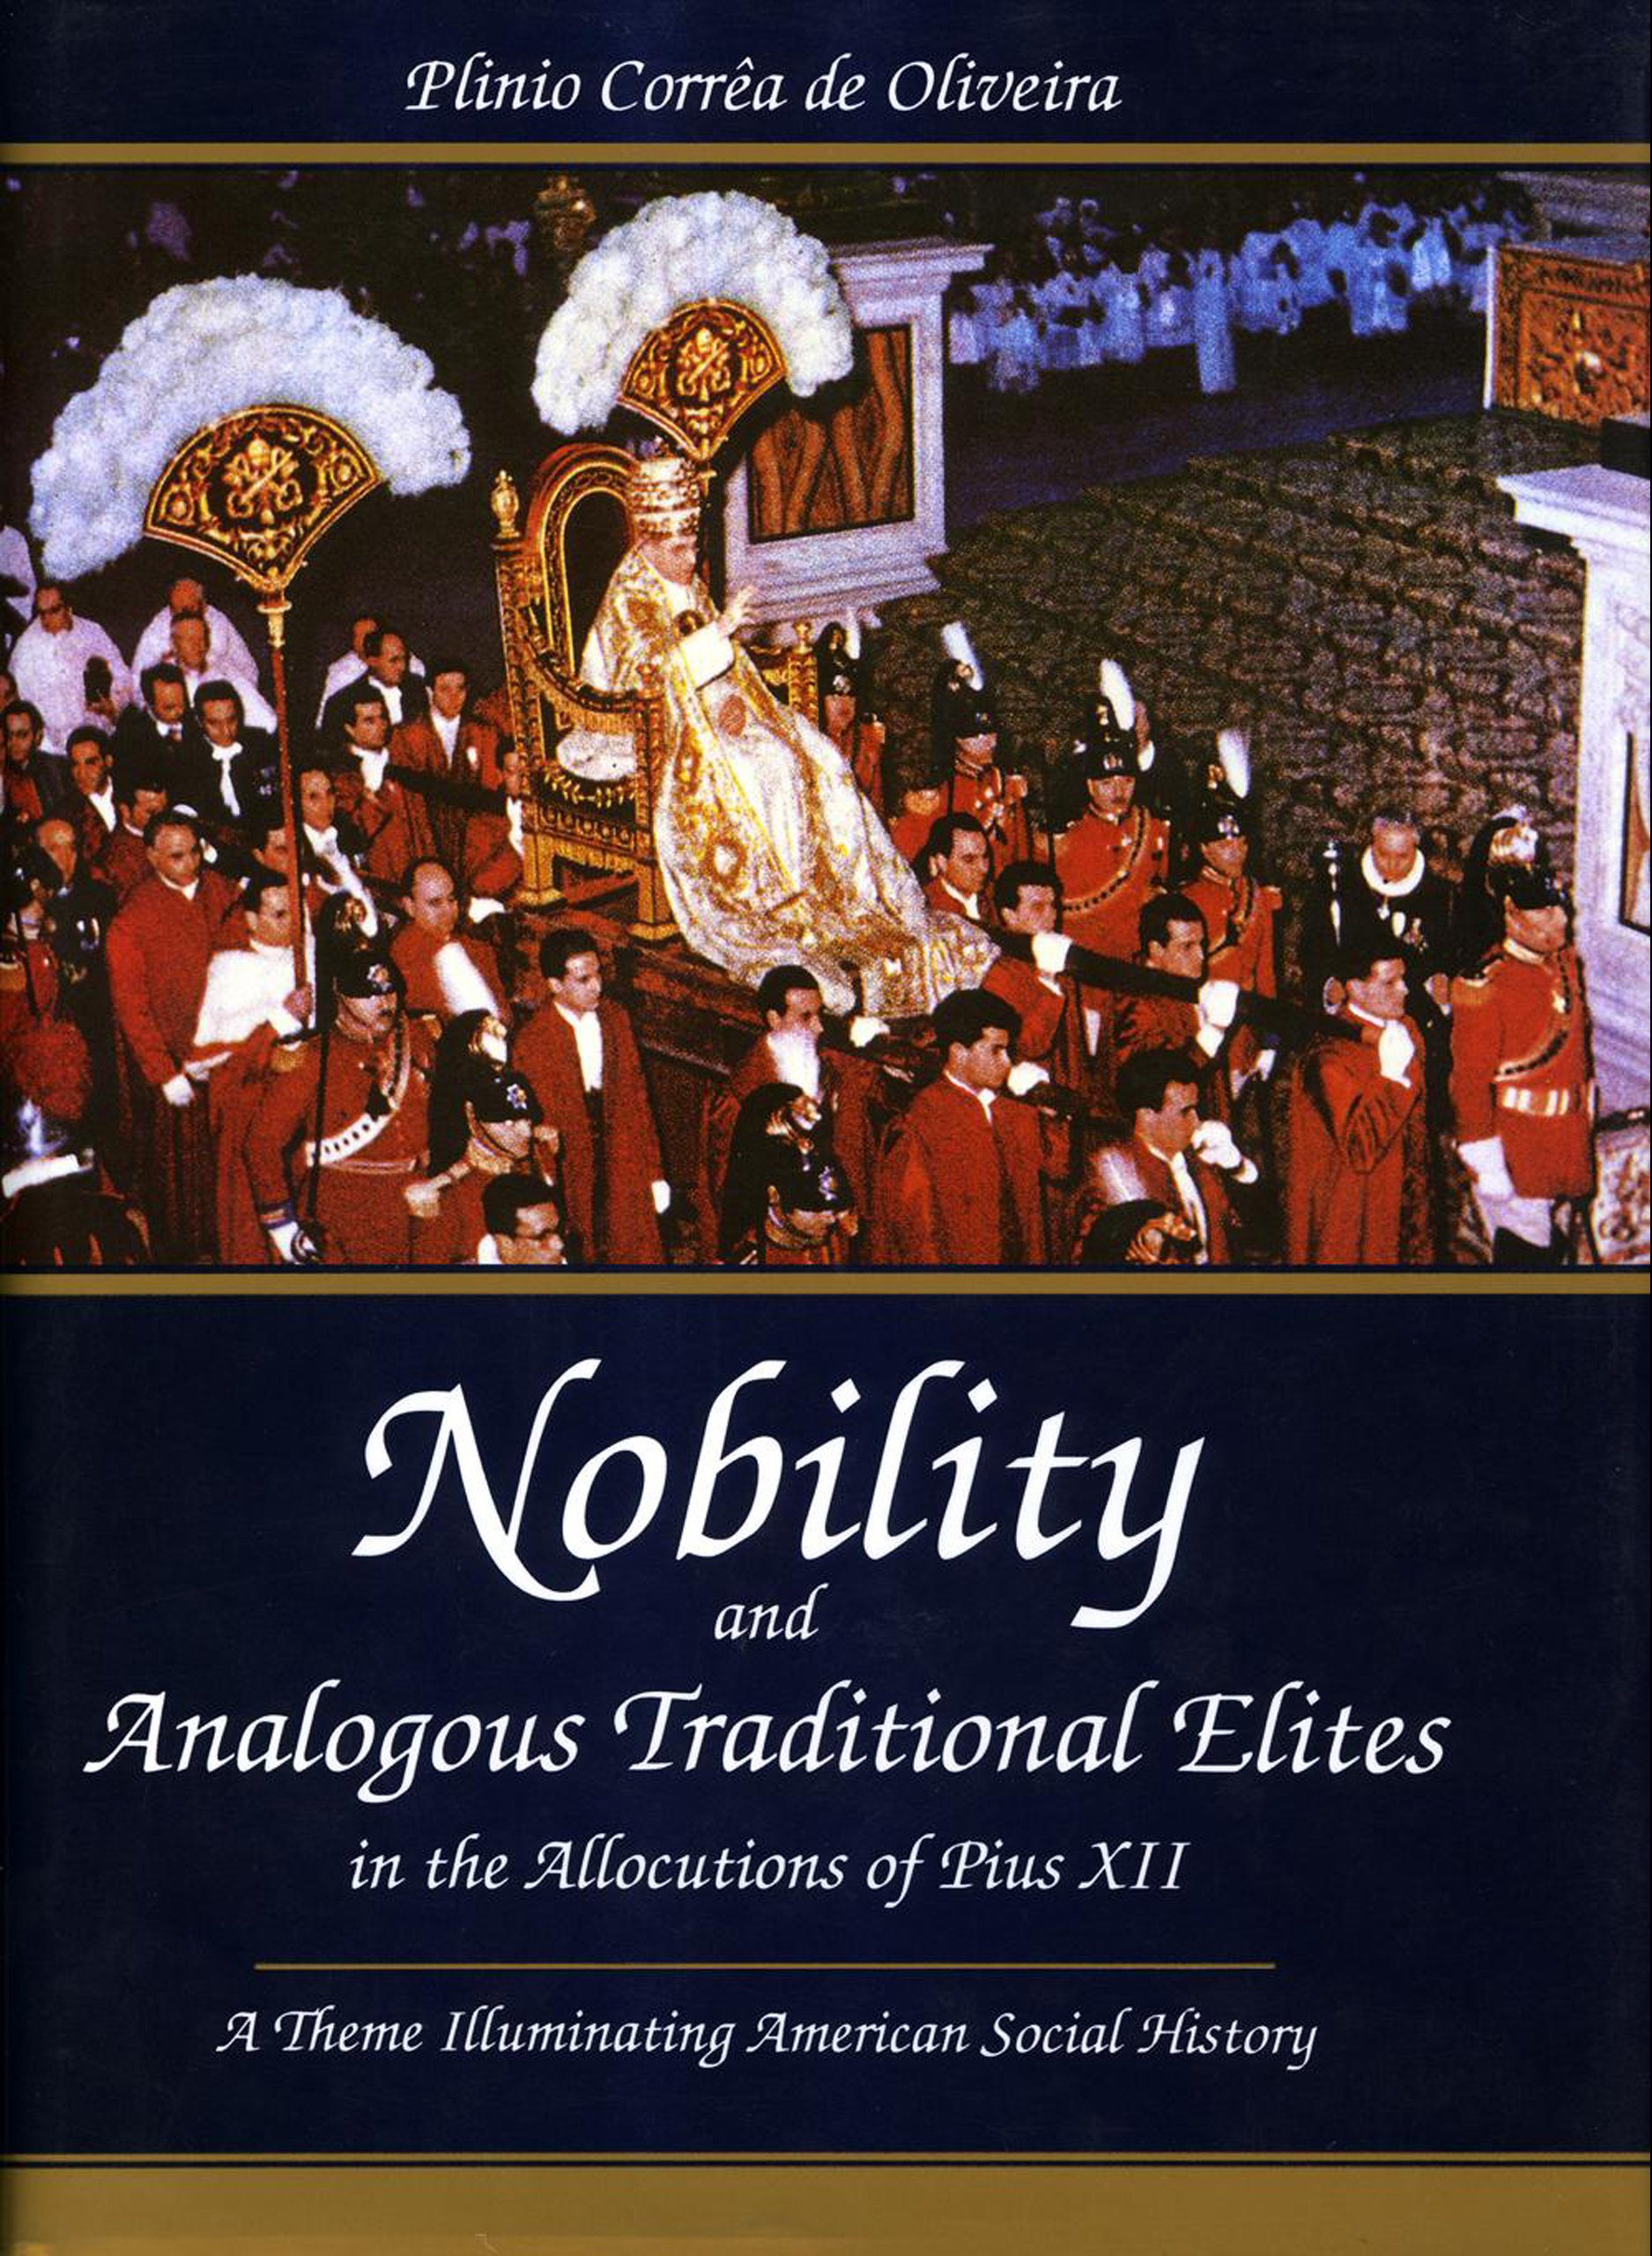 "Nobility and Analogous Traditional Elites in the Allocutions of Pius XII: A Theme Illuminating American Social History"